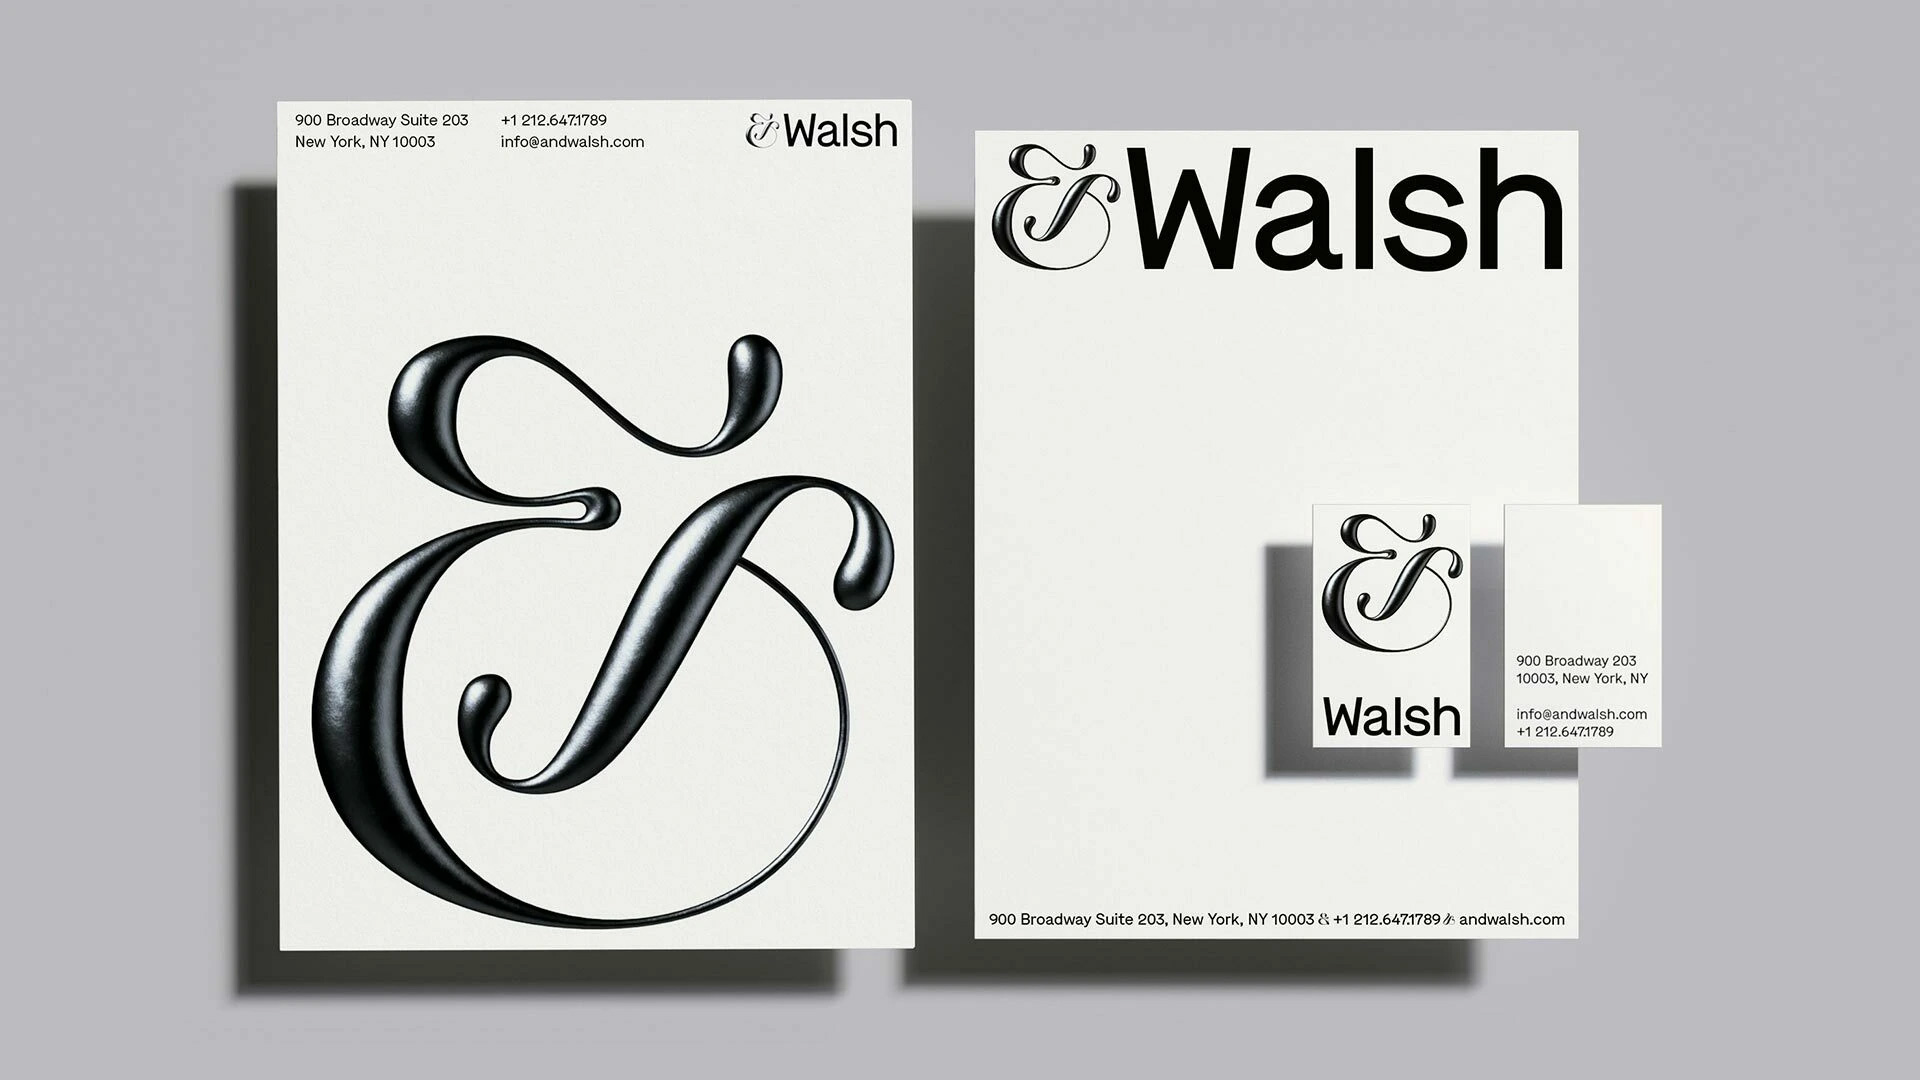 New Name, Logo, and Identity for and by &Walsh